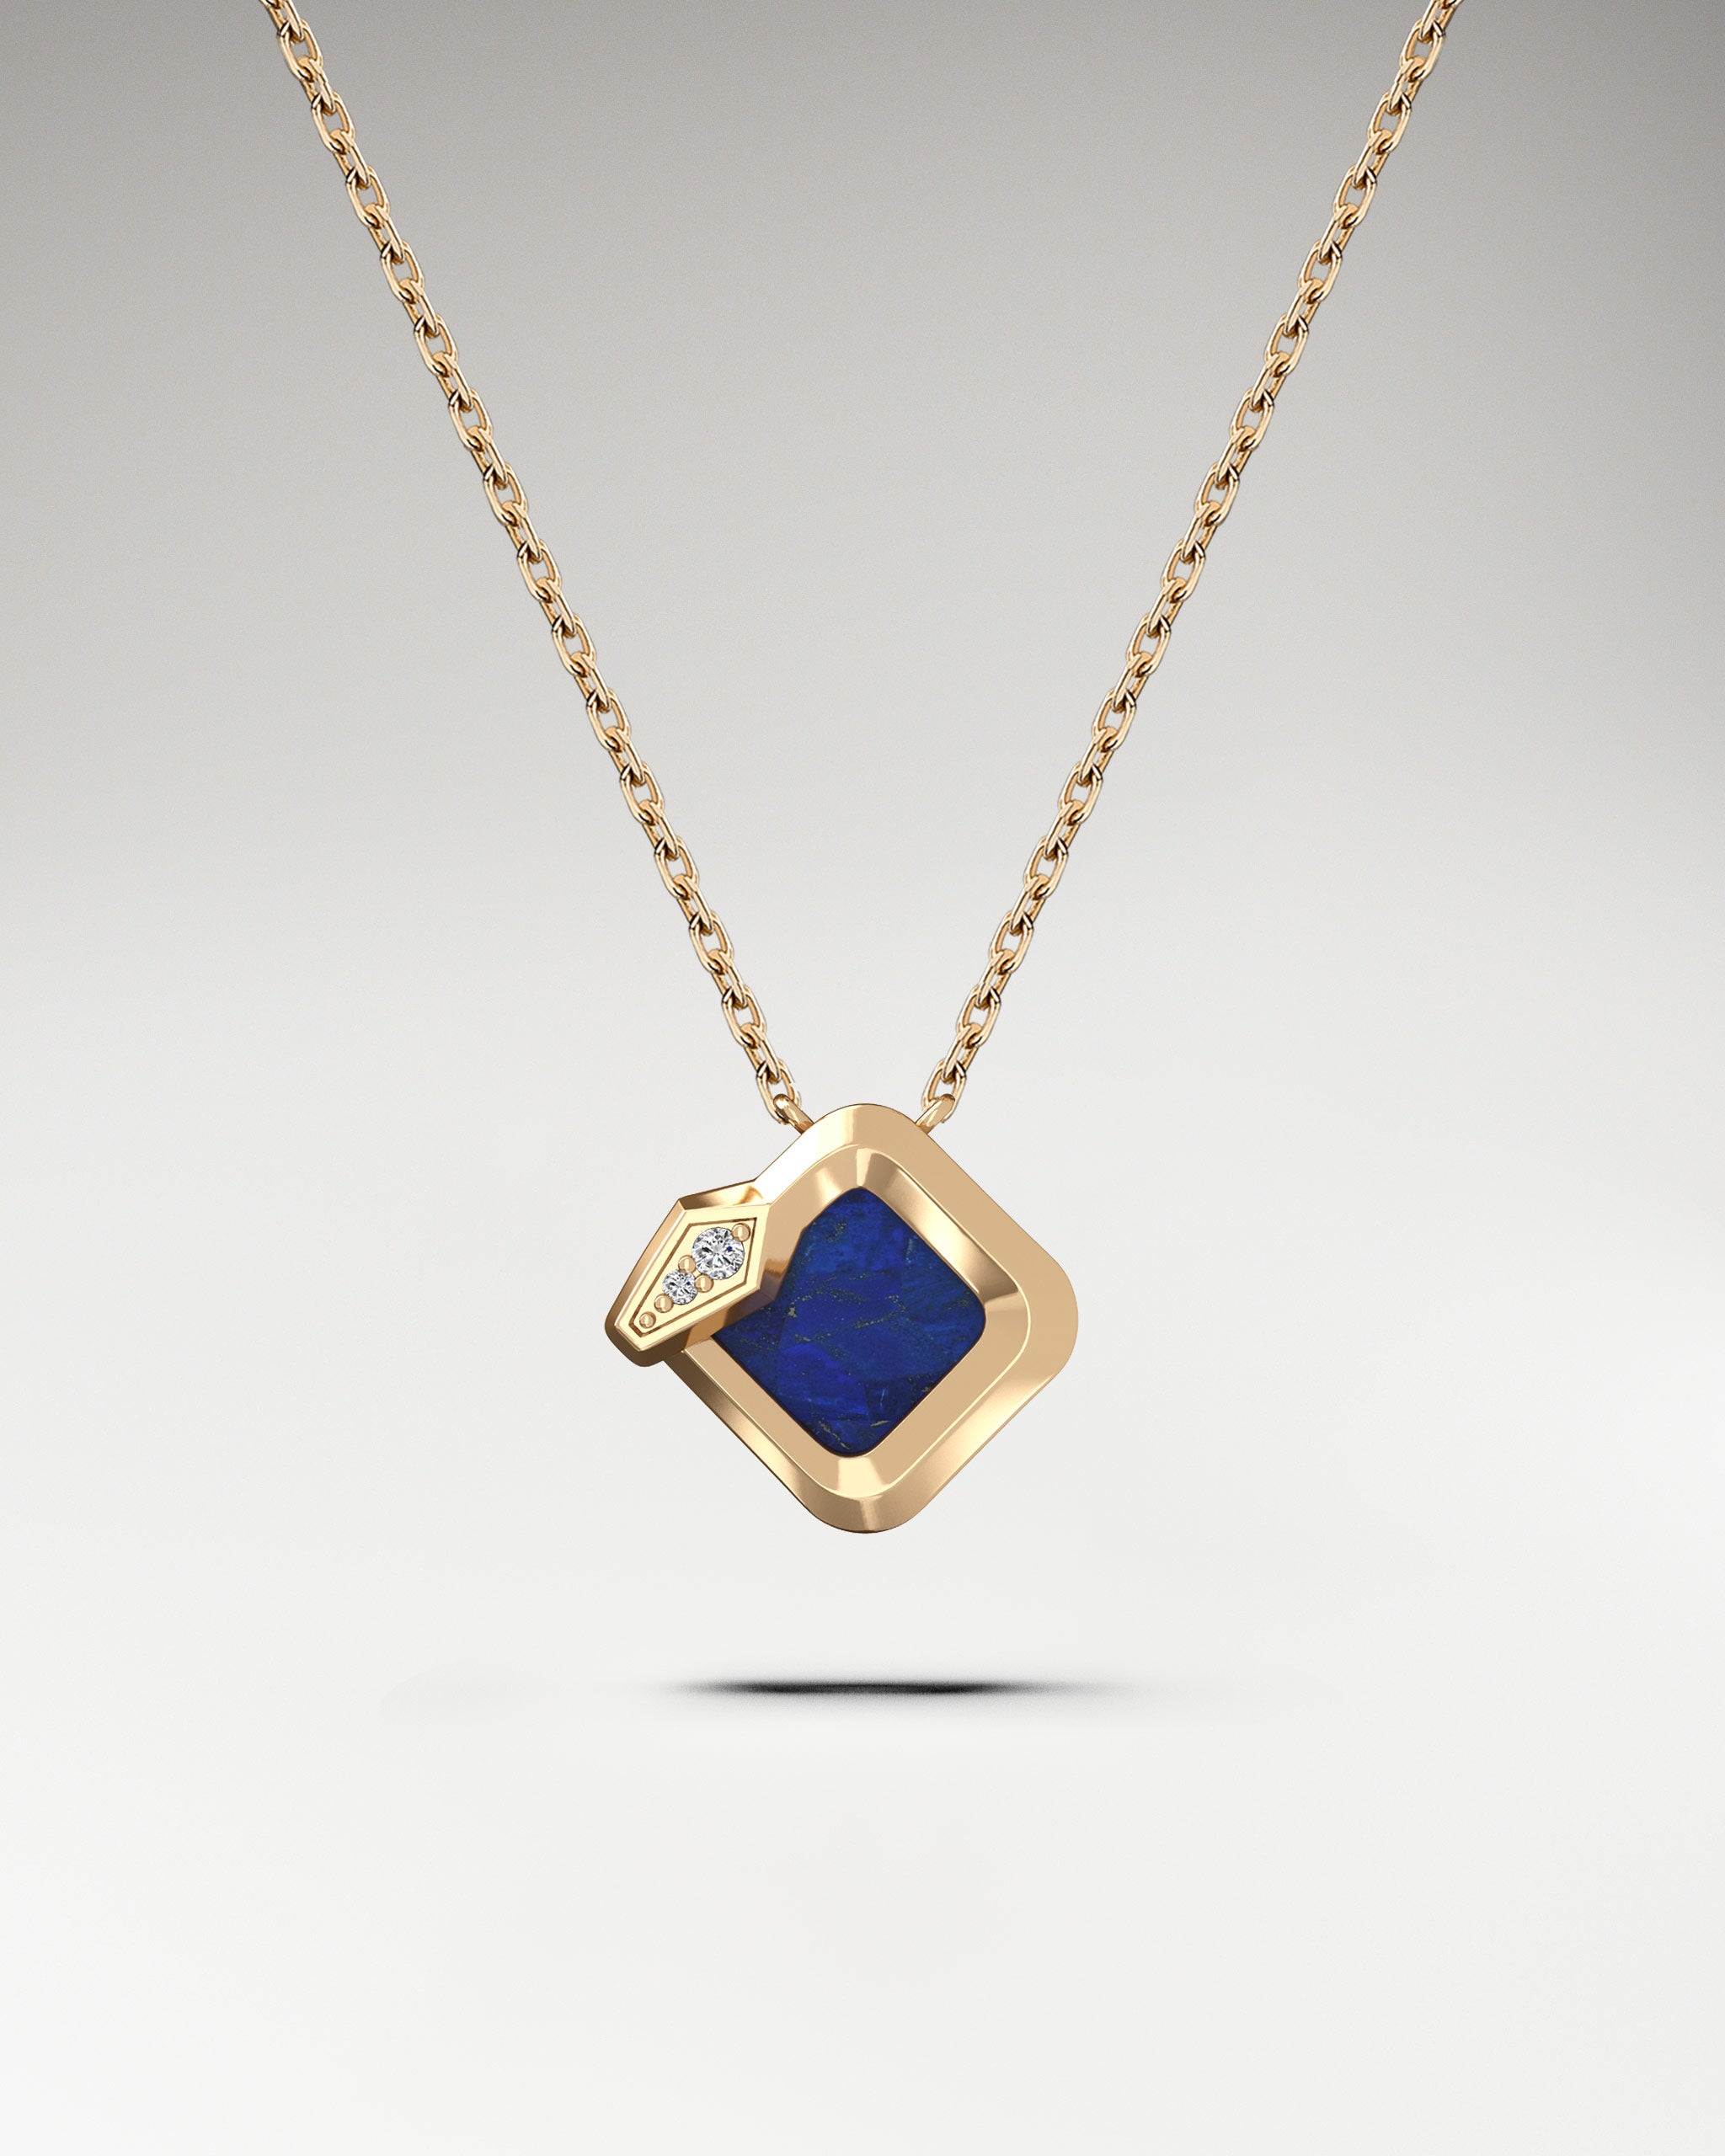 Viper Pendant Necklace in 10k Gold with Lapis Lazuli and Diamonds